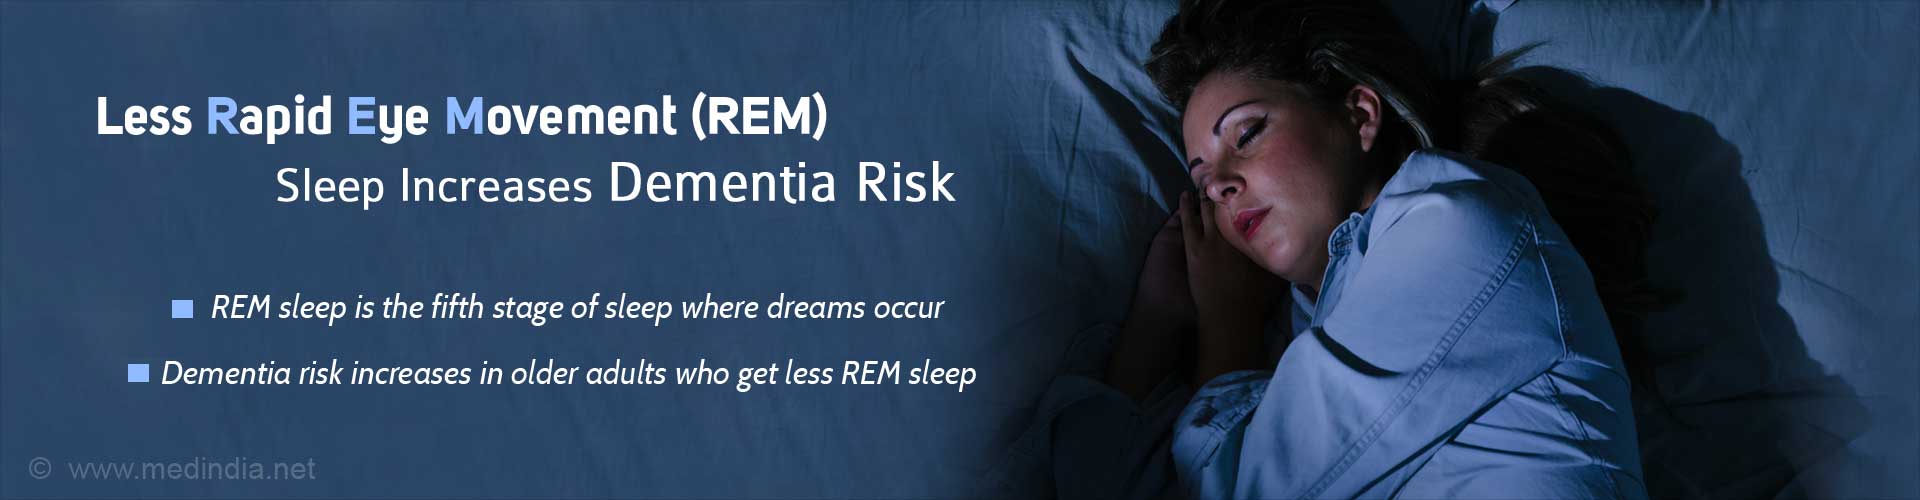 Less rapid eye movement (REM) sleep increases dementia risk
- REM sleep is the fifth stage of sleep where dreams occur
- Dementia risk increases in older adults who get less REM sleep